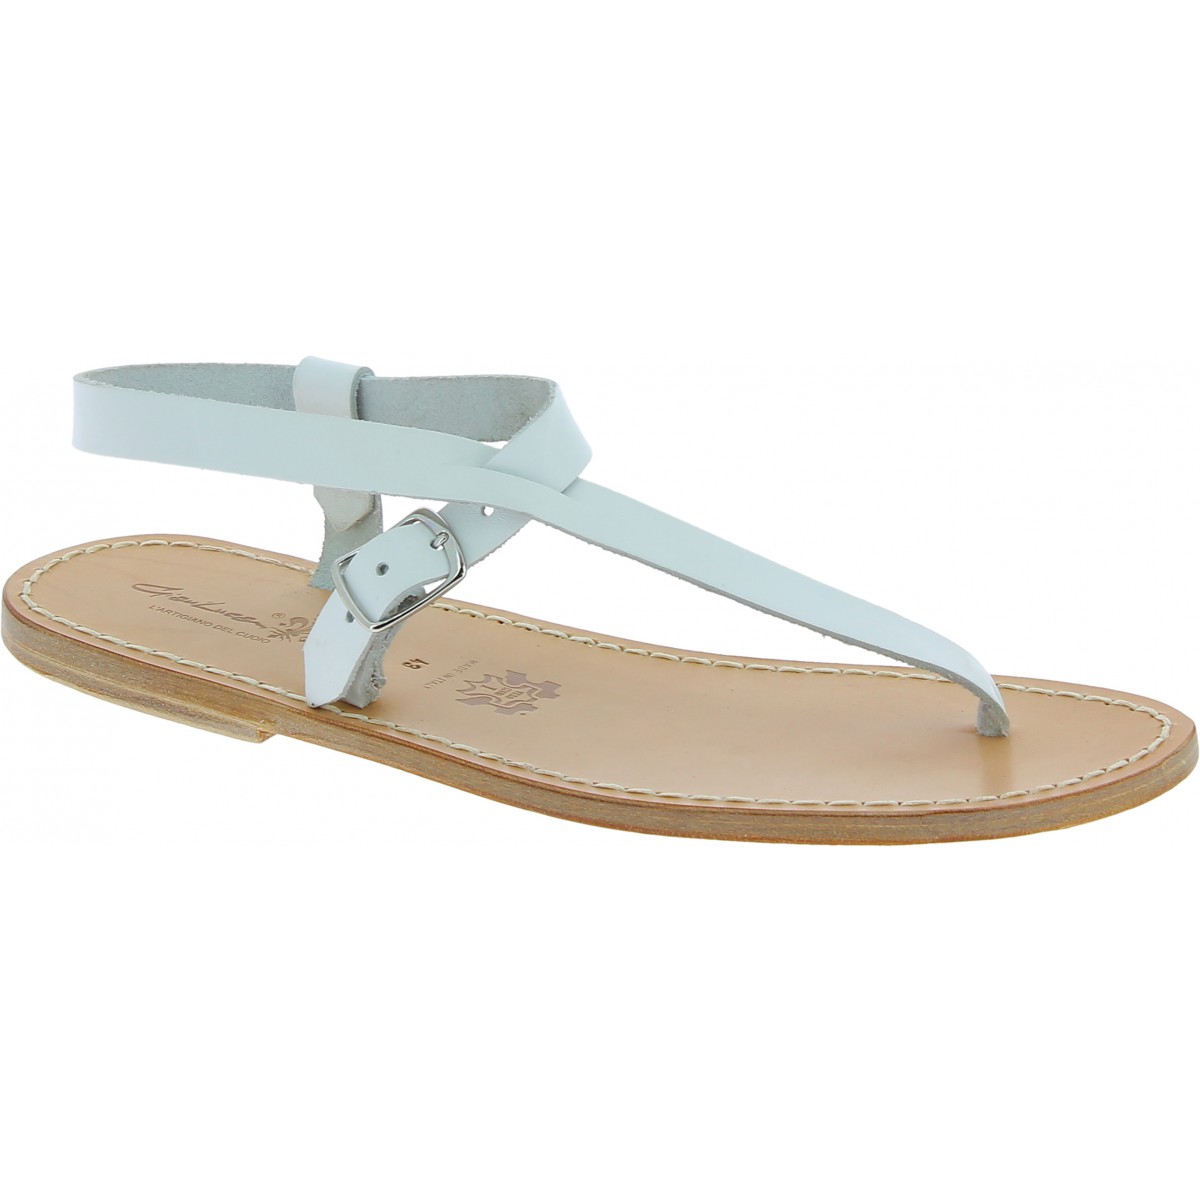 Handmade white leather thong sandals 